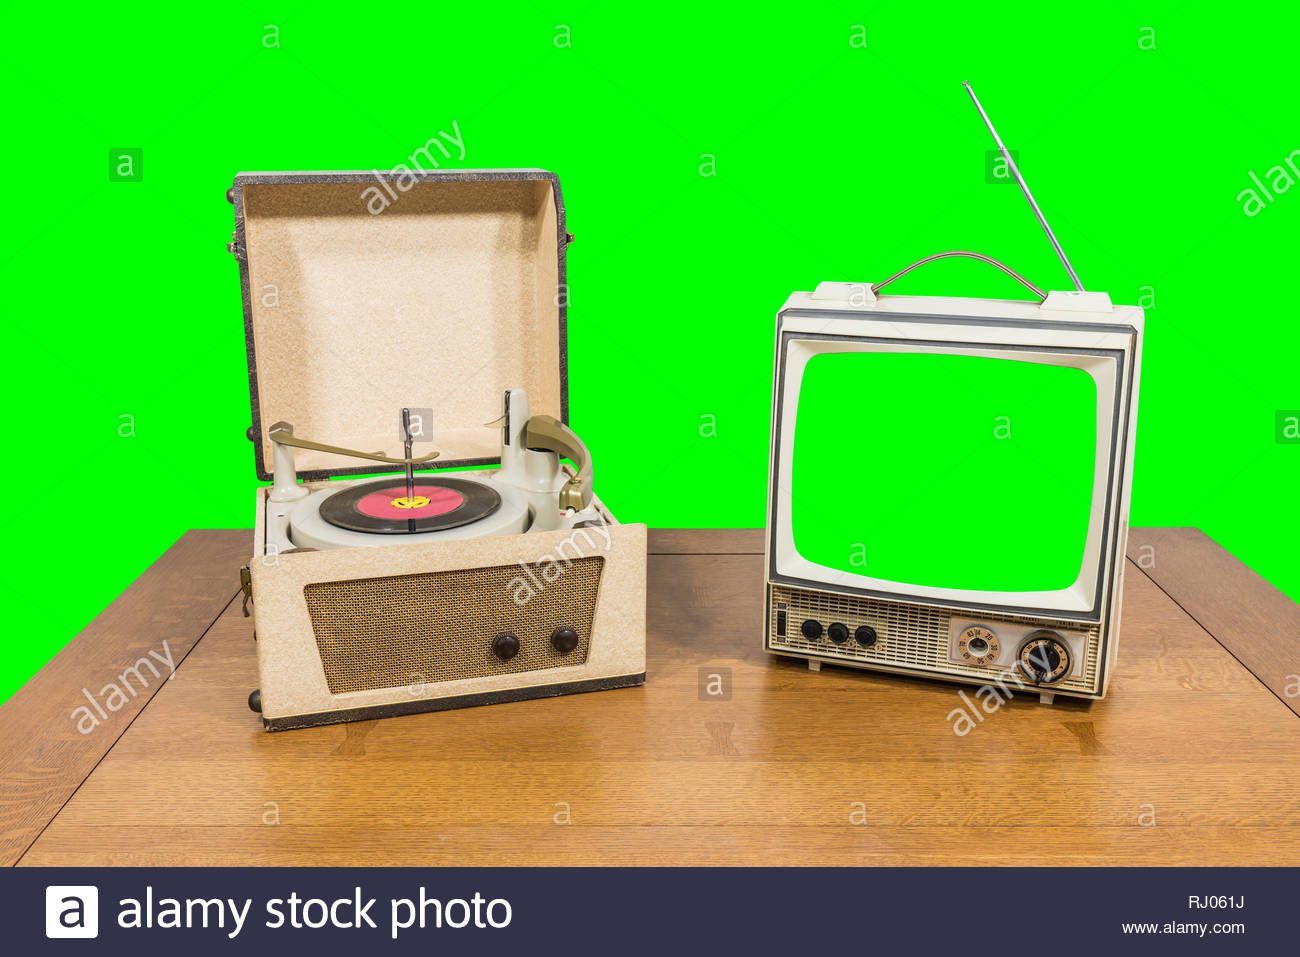 Vintage Portable Record Player And Television With Chroma